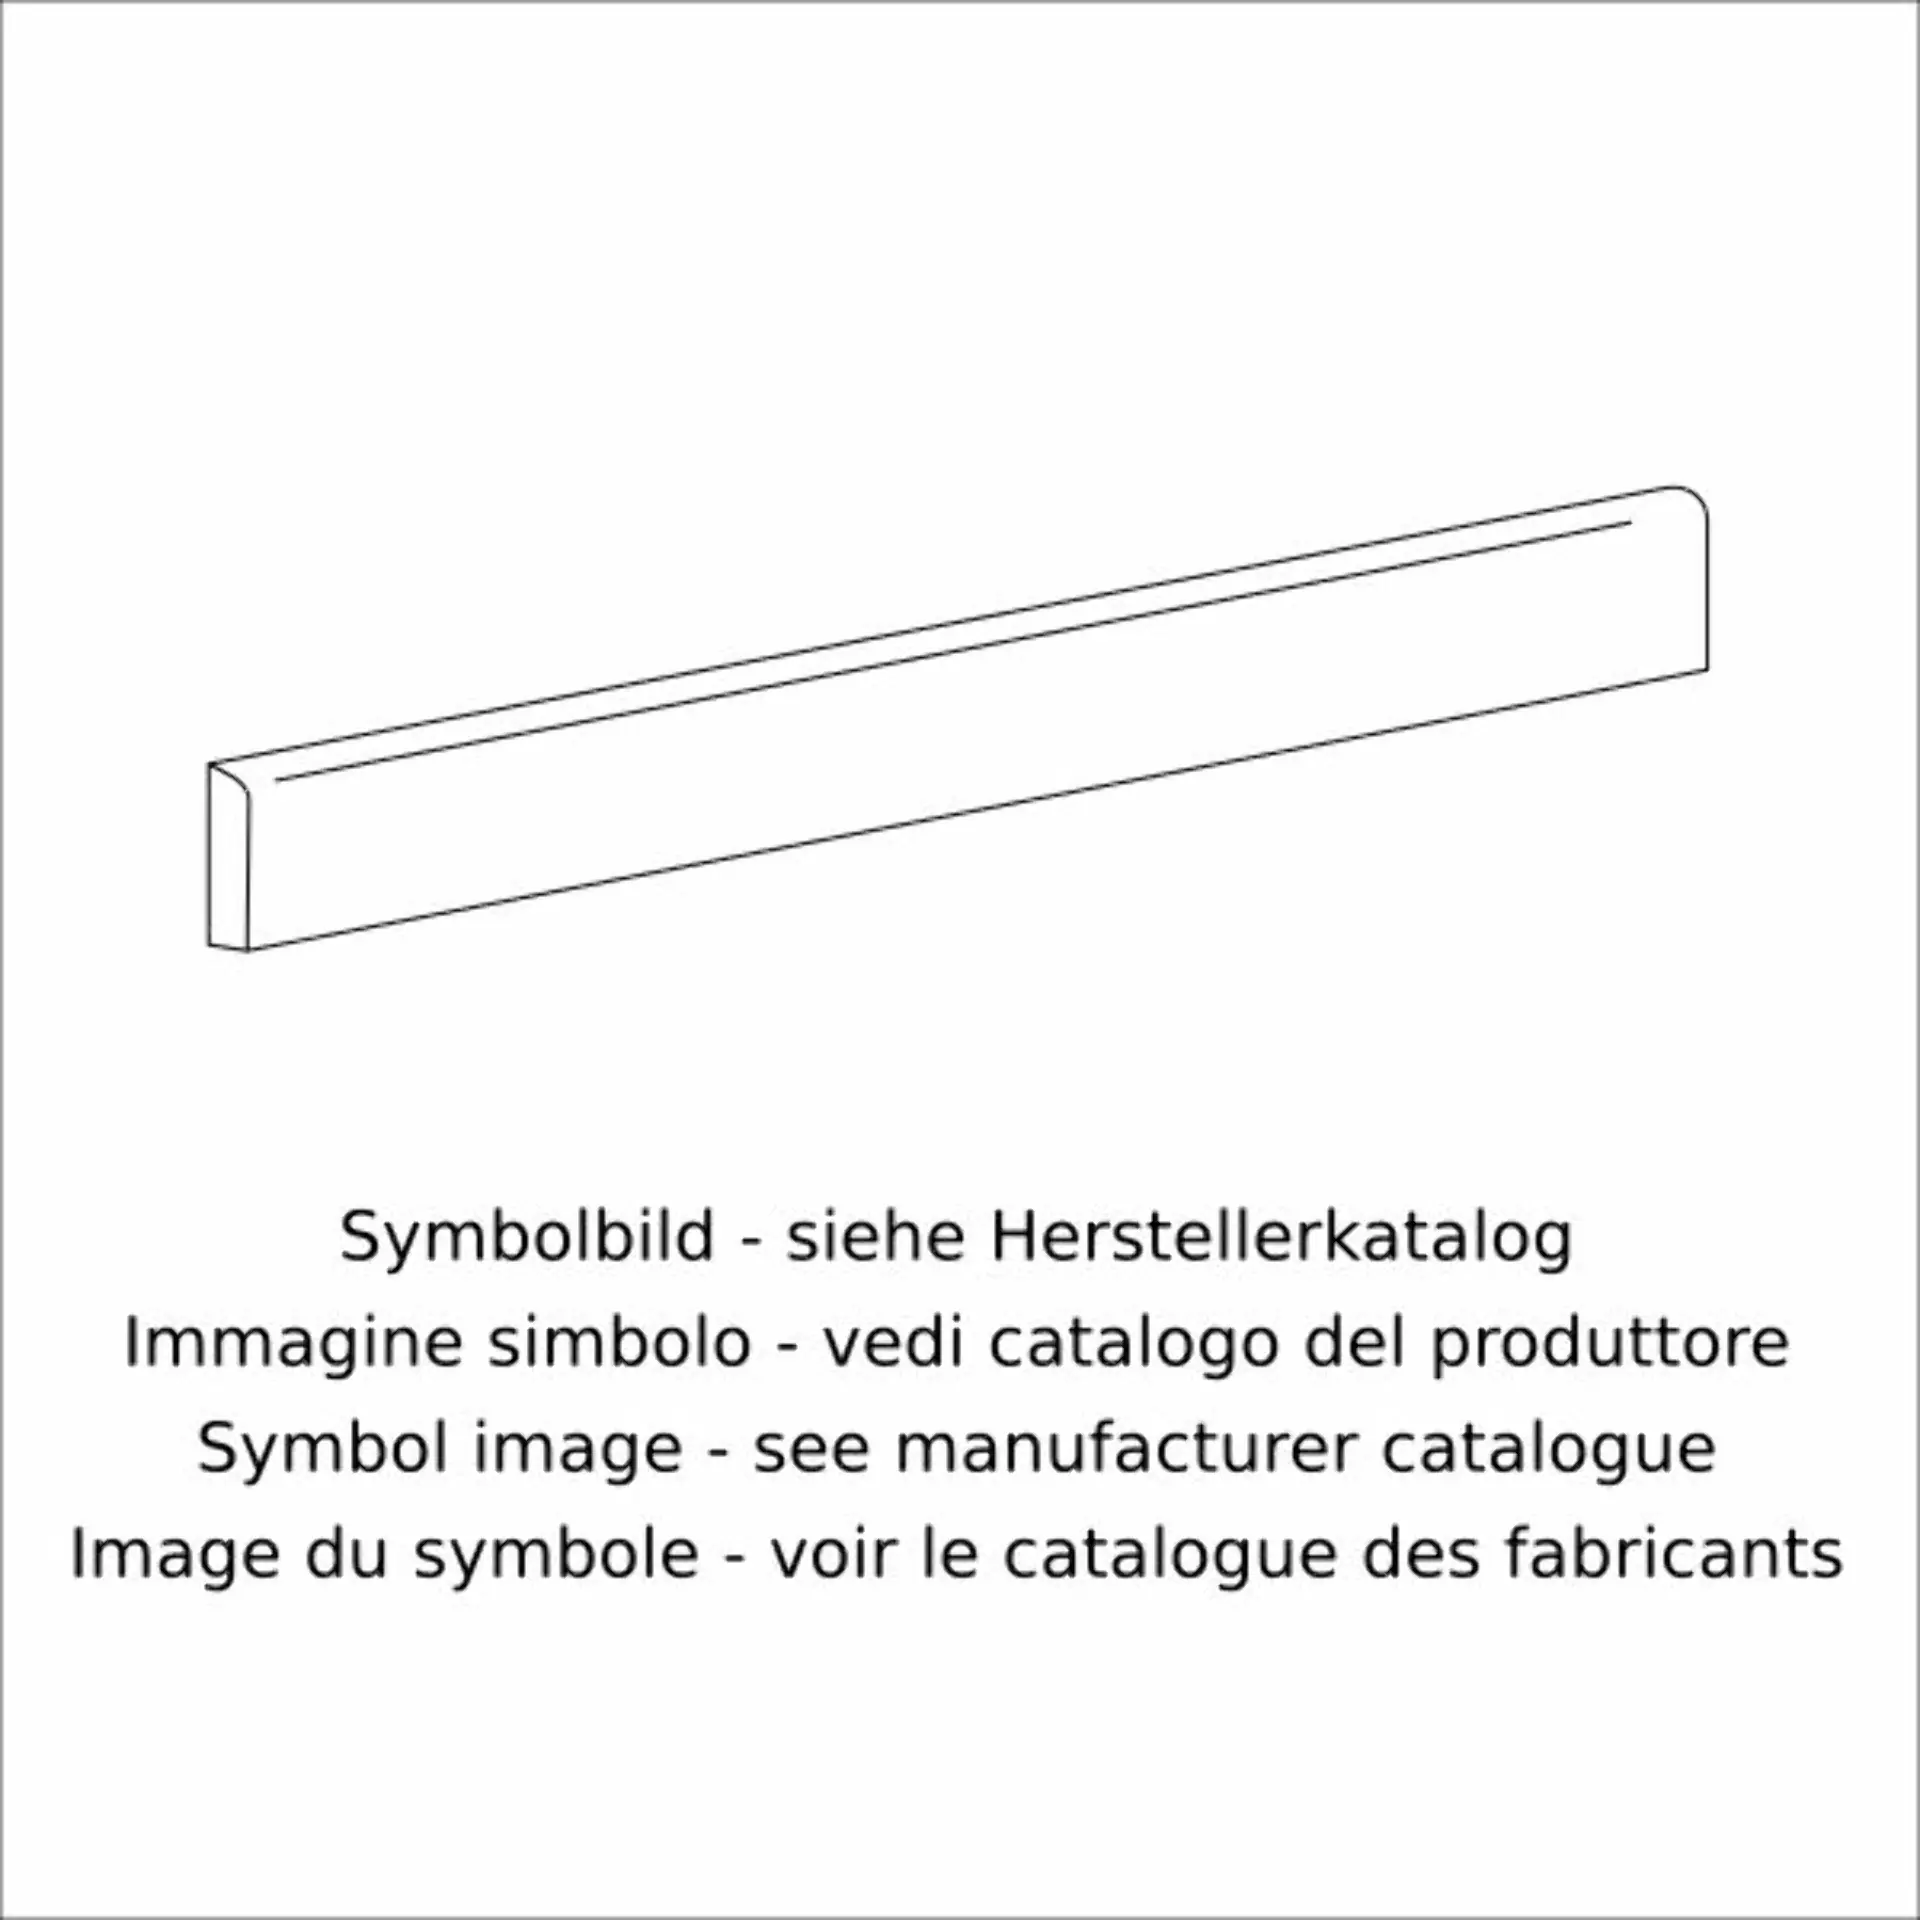 Emilceramica Totalook Antracite Soft Skirting board EHK5 4,6x80cm rectified 9,5mm